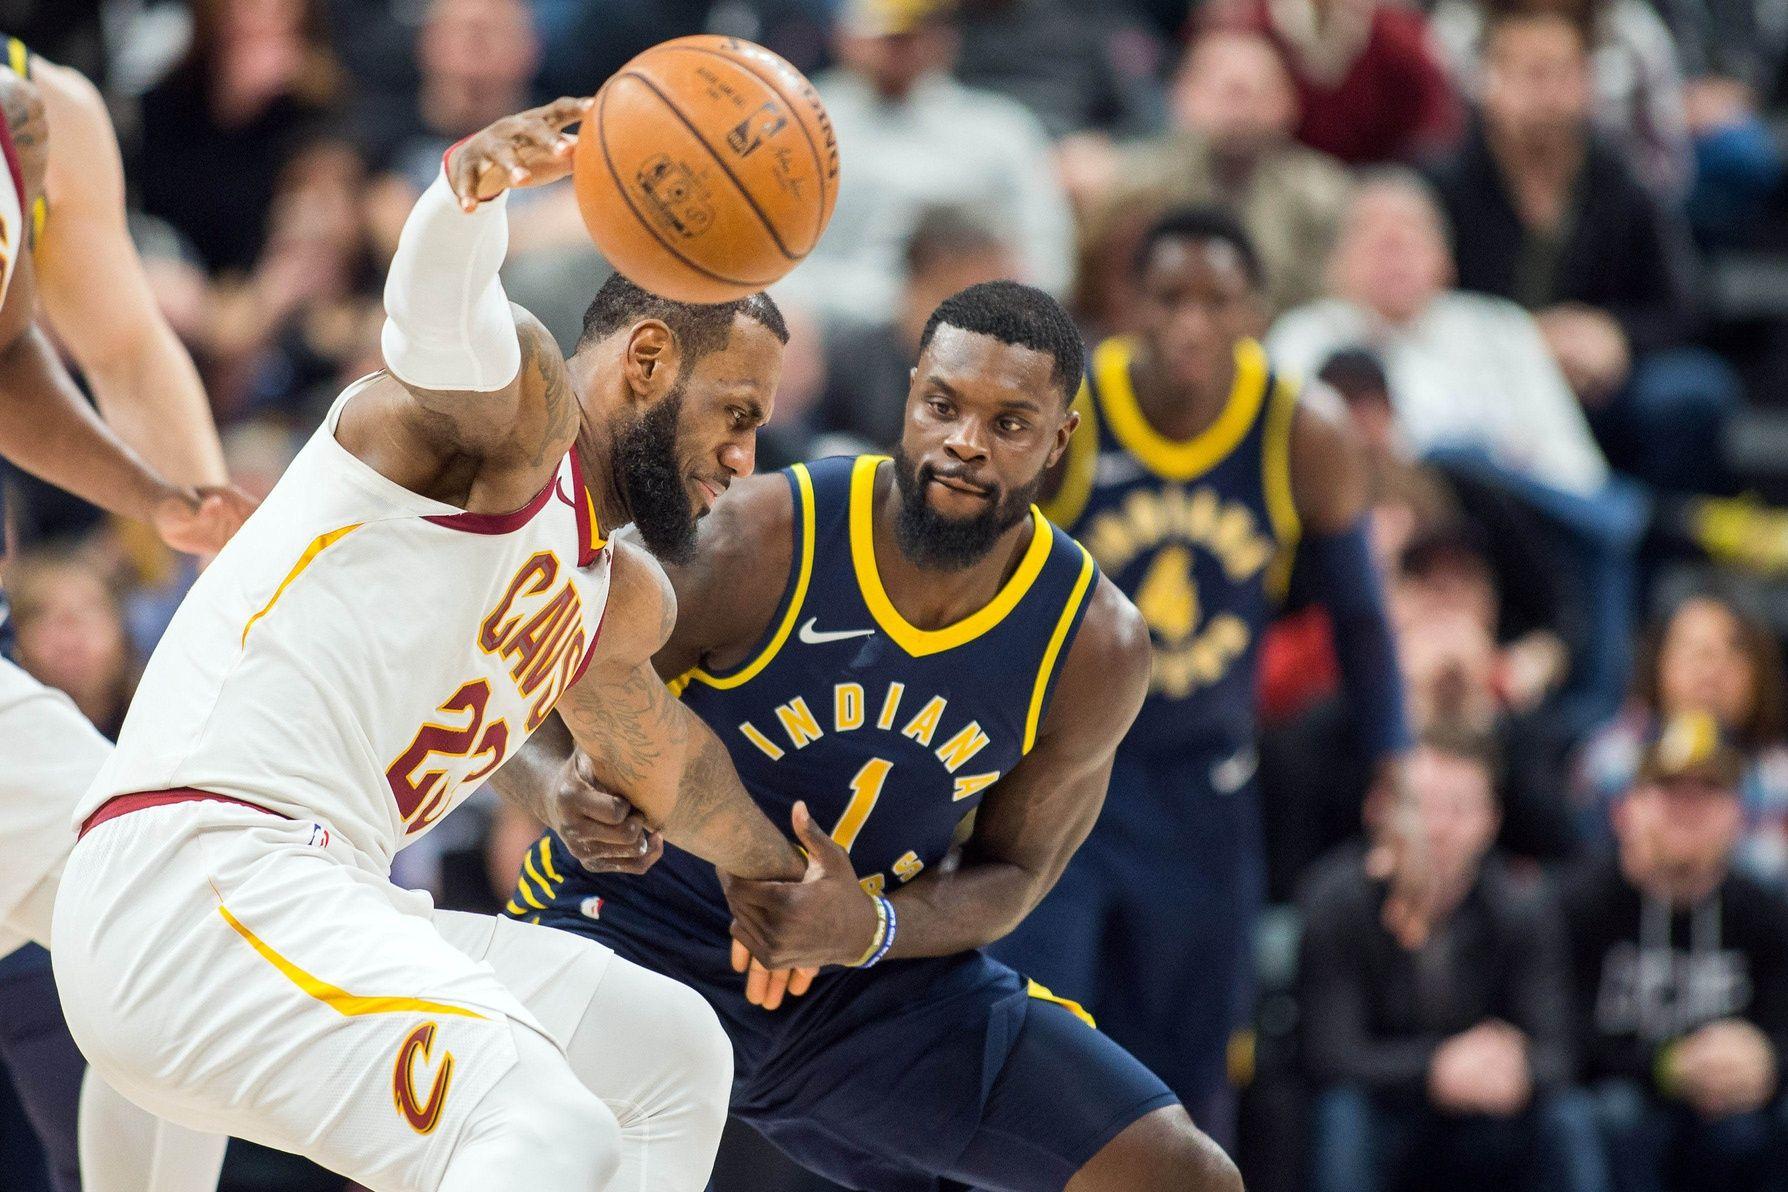 Lance Stephenson continues to find ways to bother LeBron James